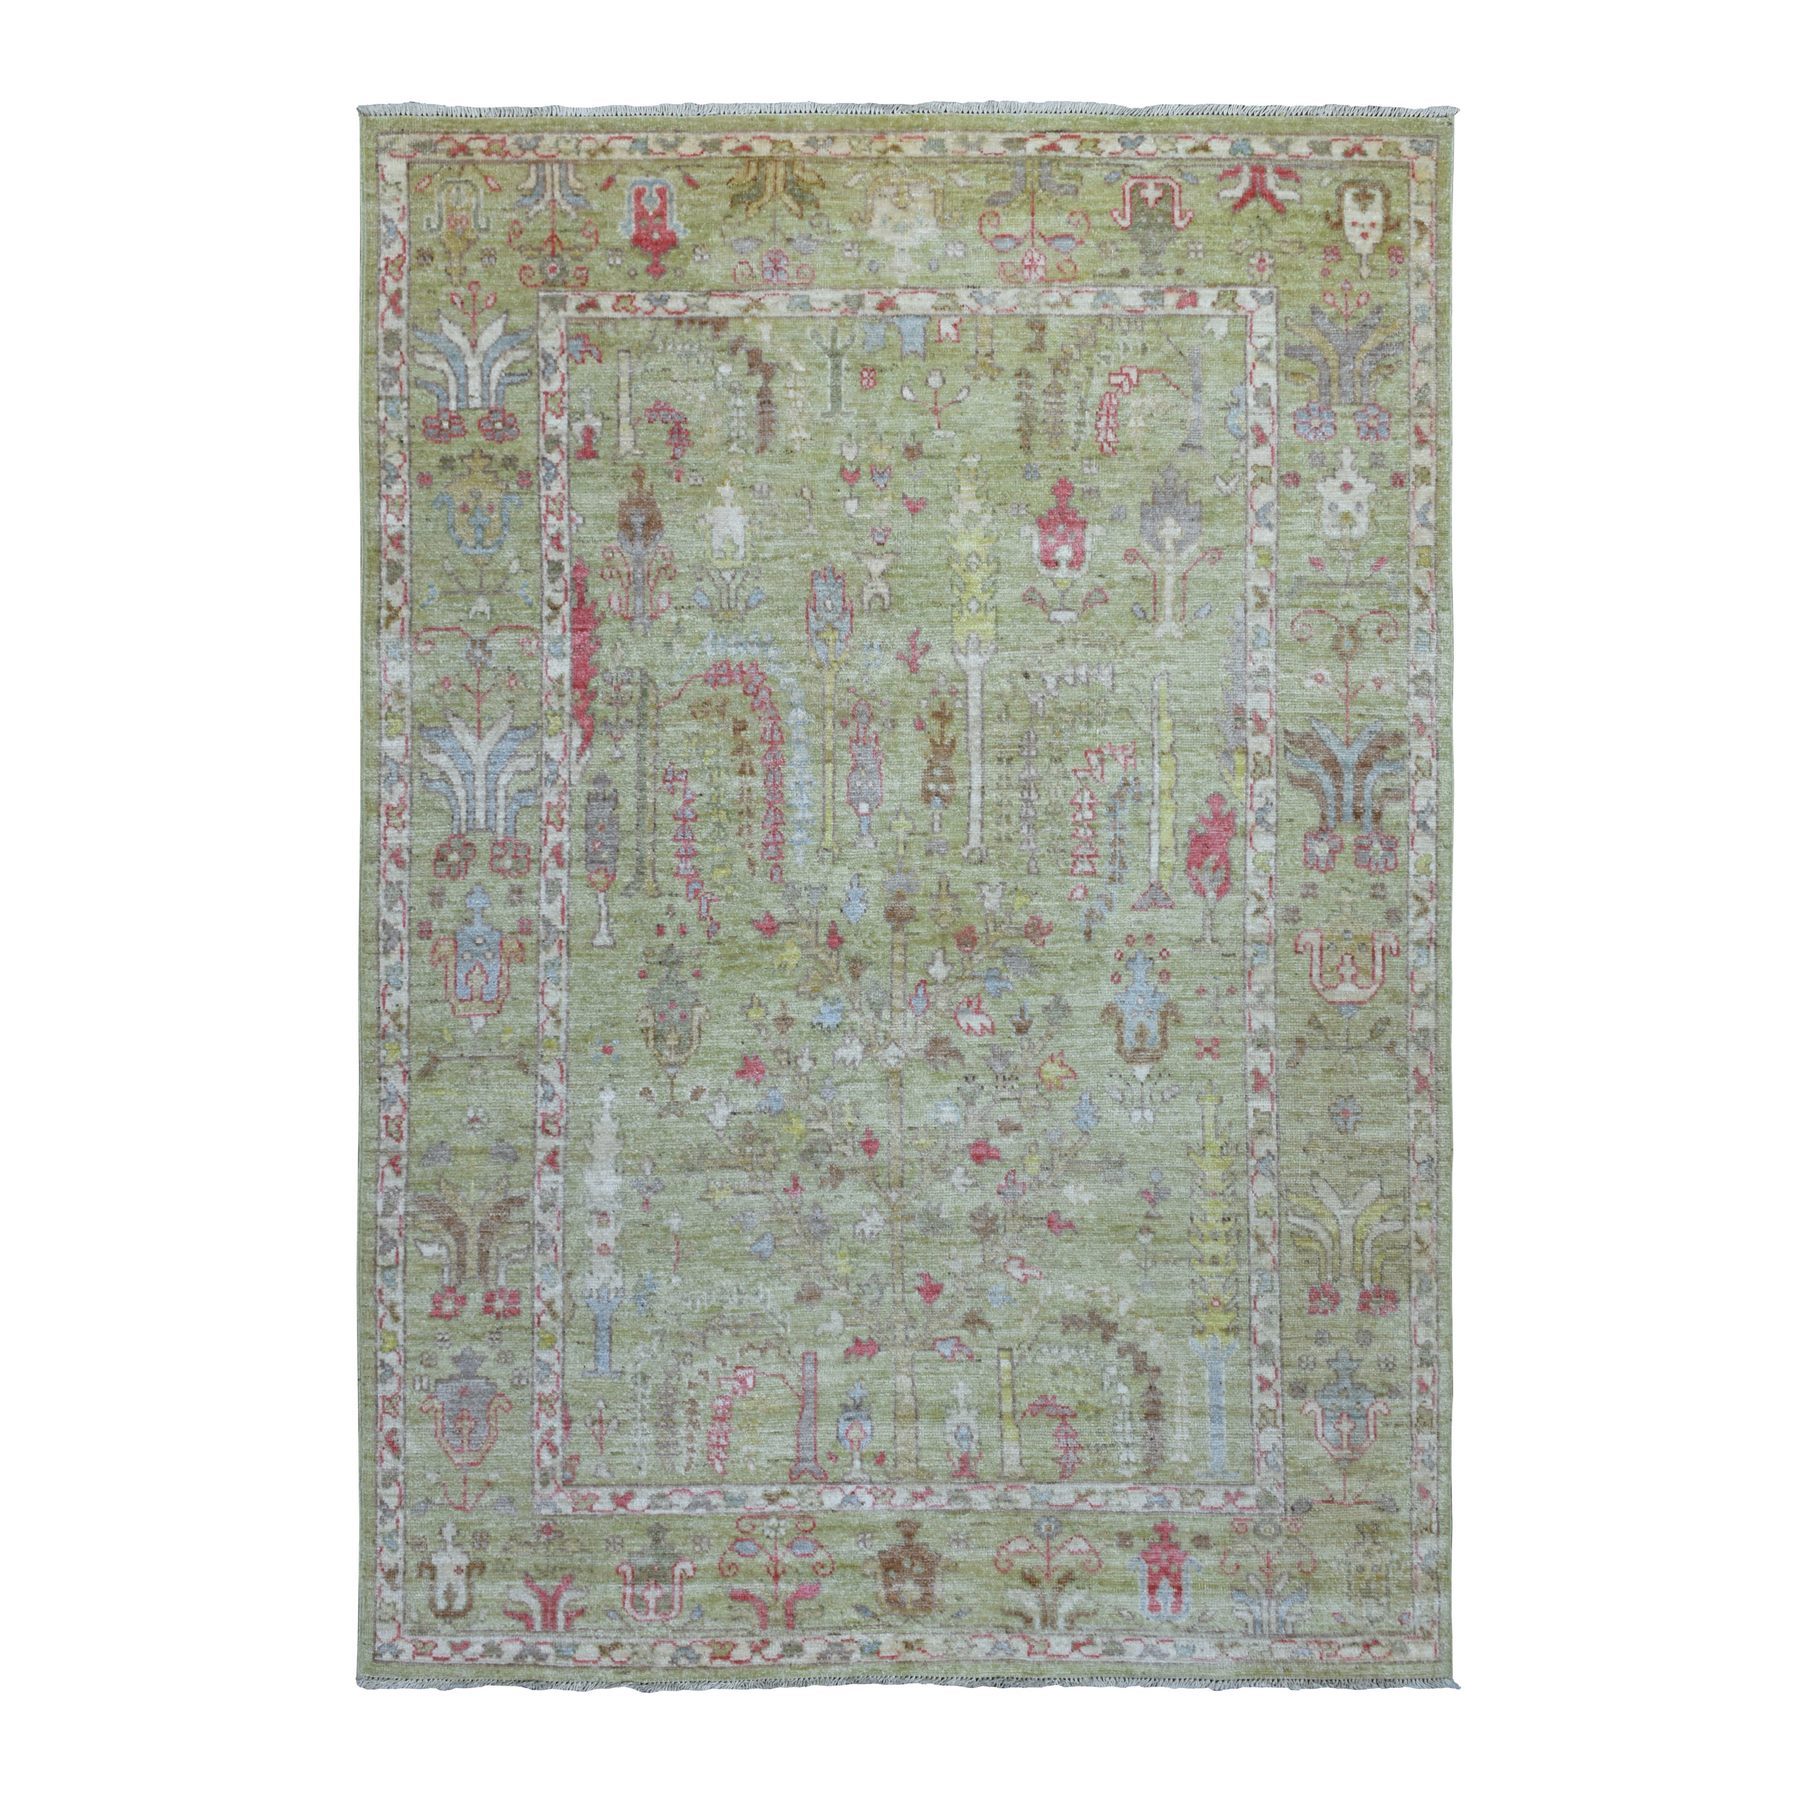 6'2"x9' Soft Wool Hand Woven Lime Green Angora Oushak with Colorful Cypress and Willow Tree Design Oriental Rug 